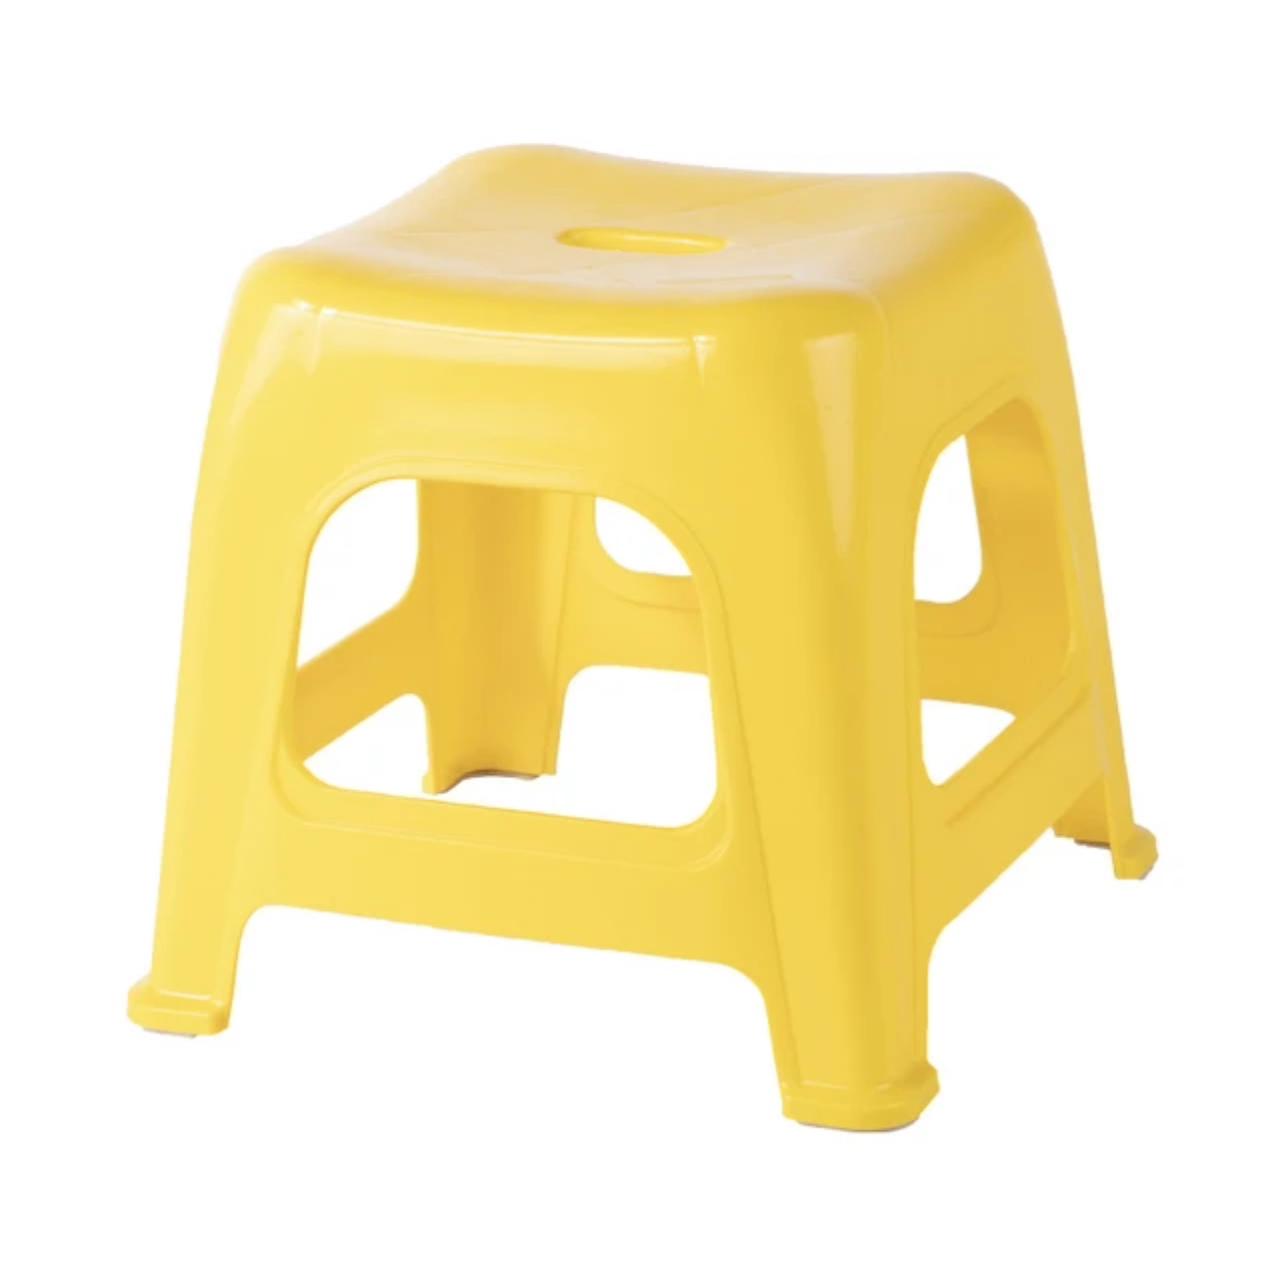 Comfort stool best for home use